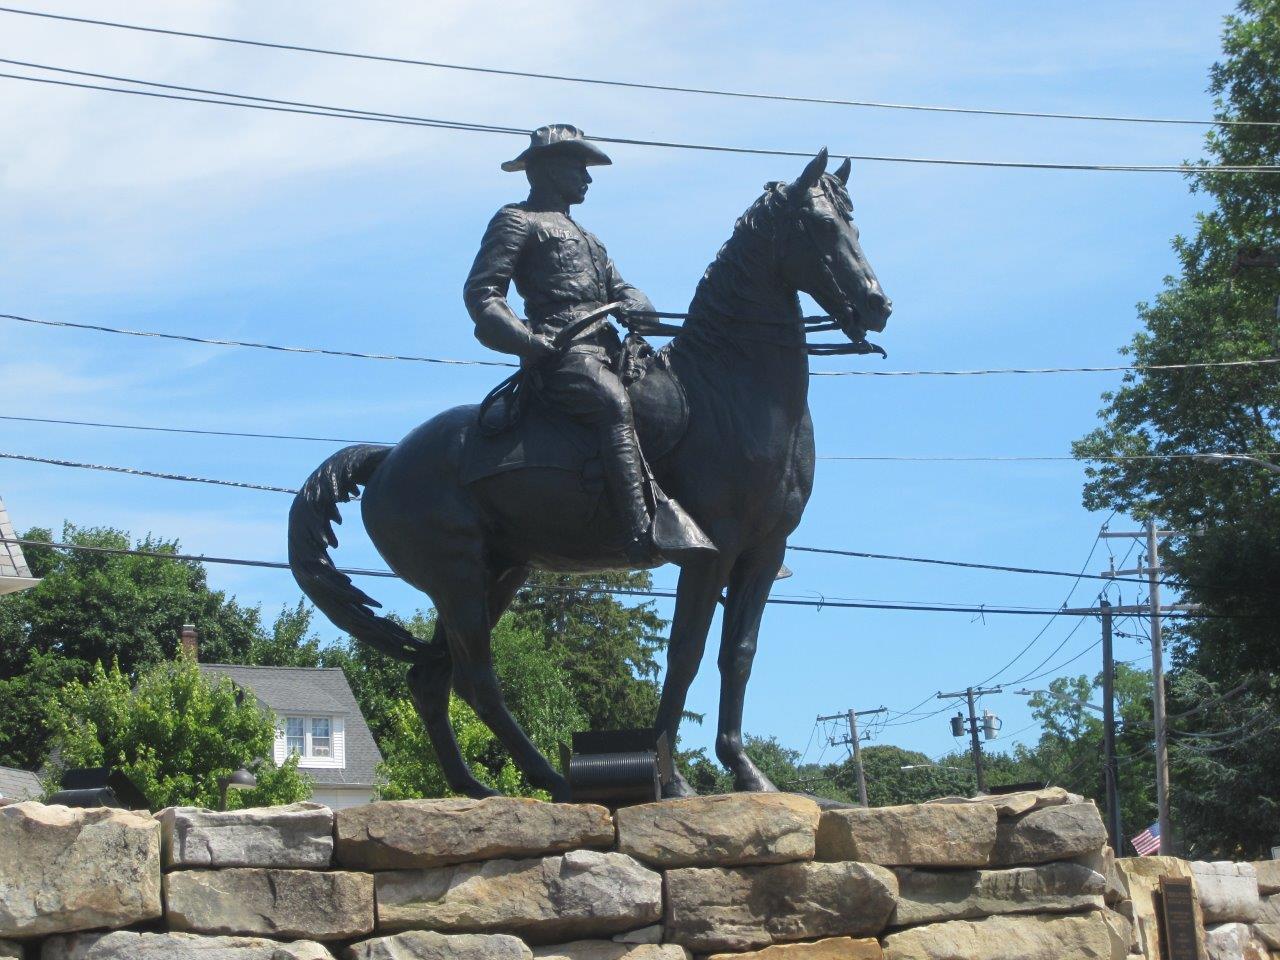 Theodore Roosevelt statue in Oyster Bay